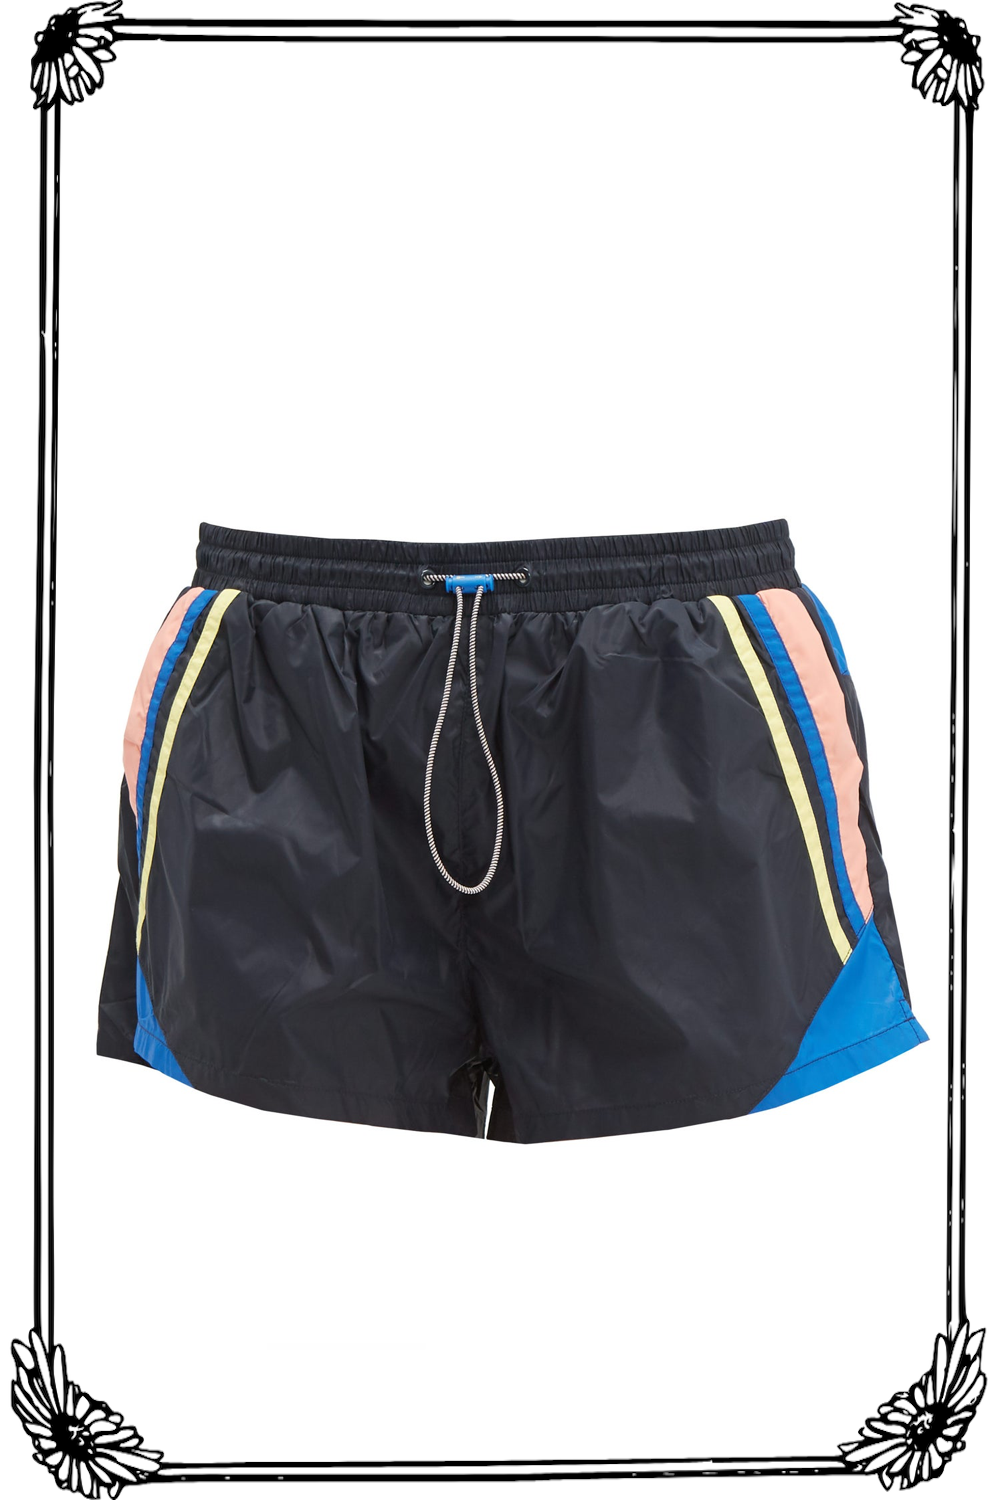   The Upside Magic Colour-Blocked Technical Shorts  ($48, on sale from $96) 